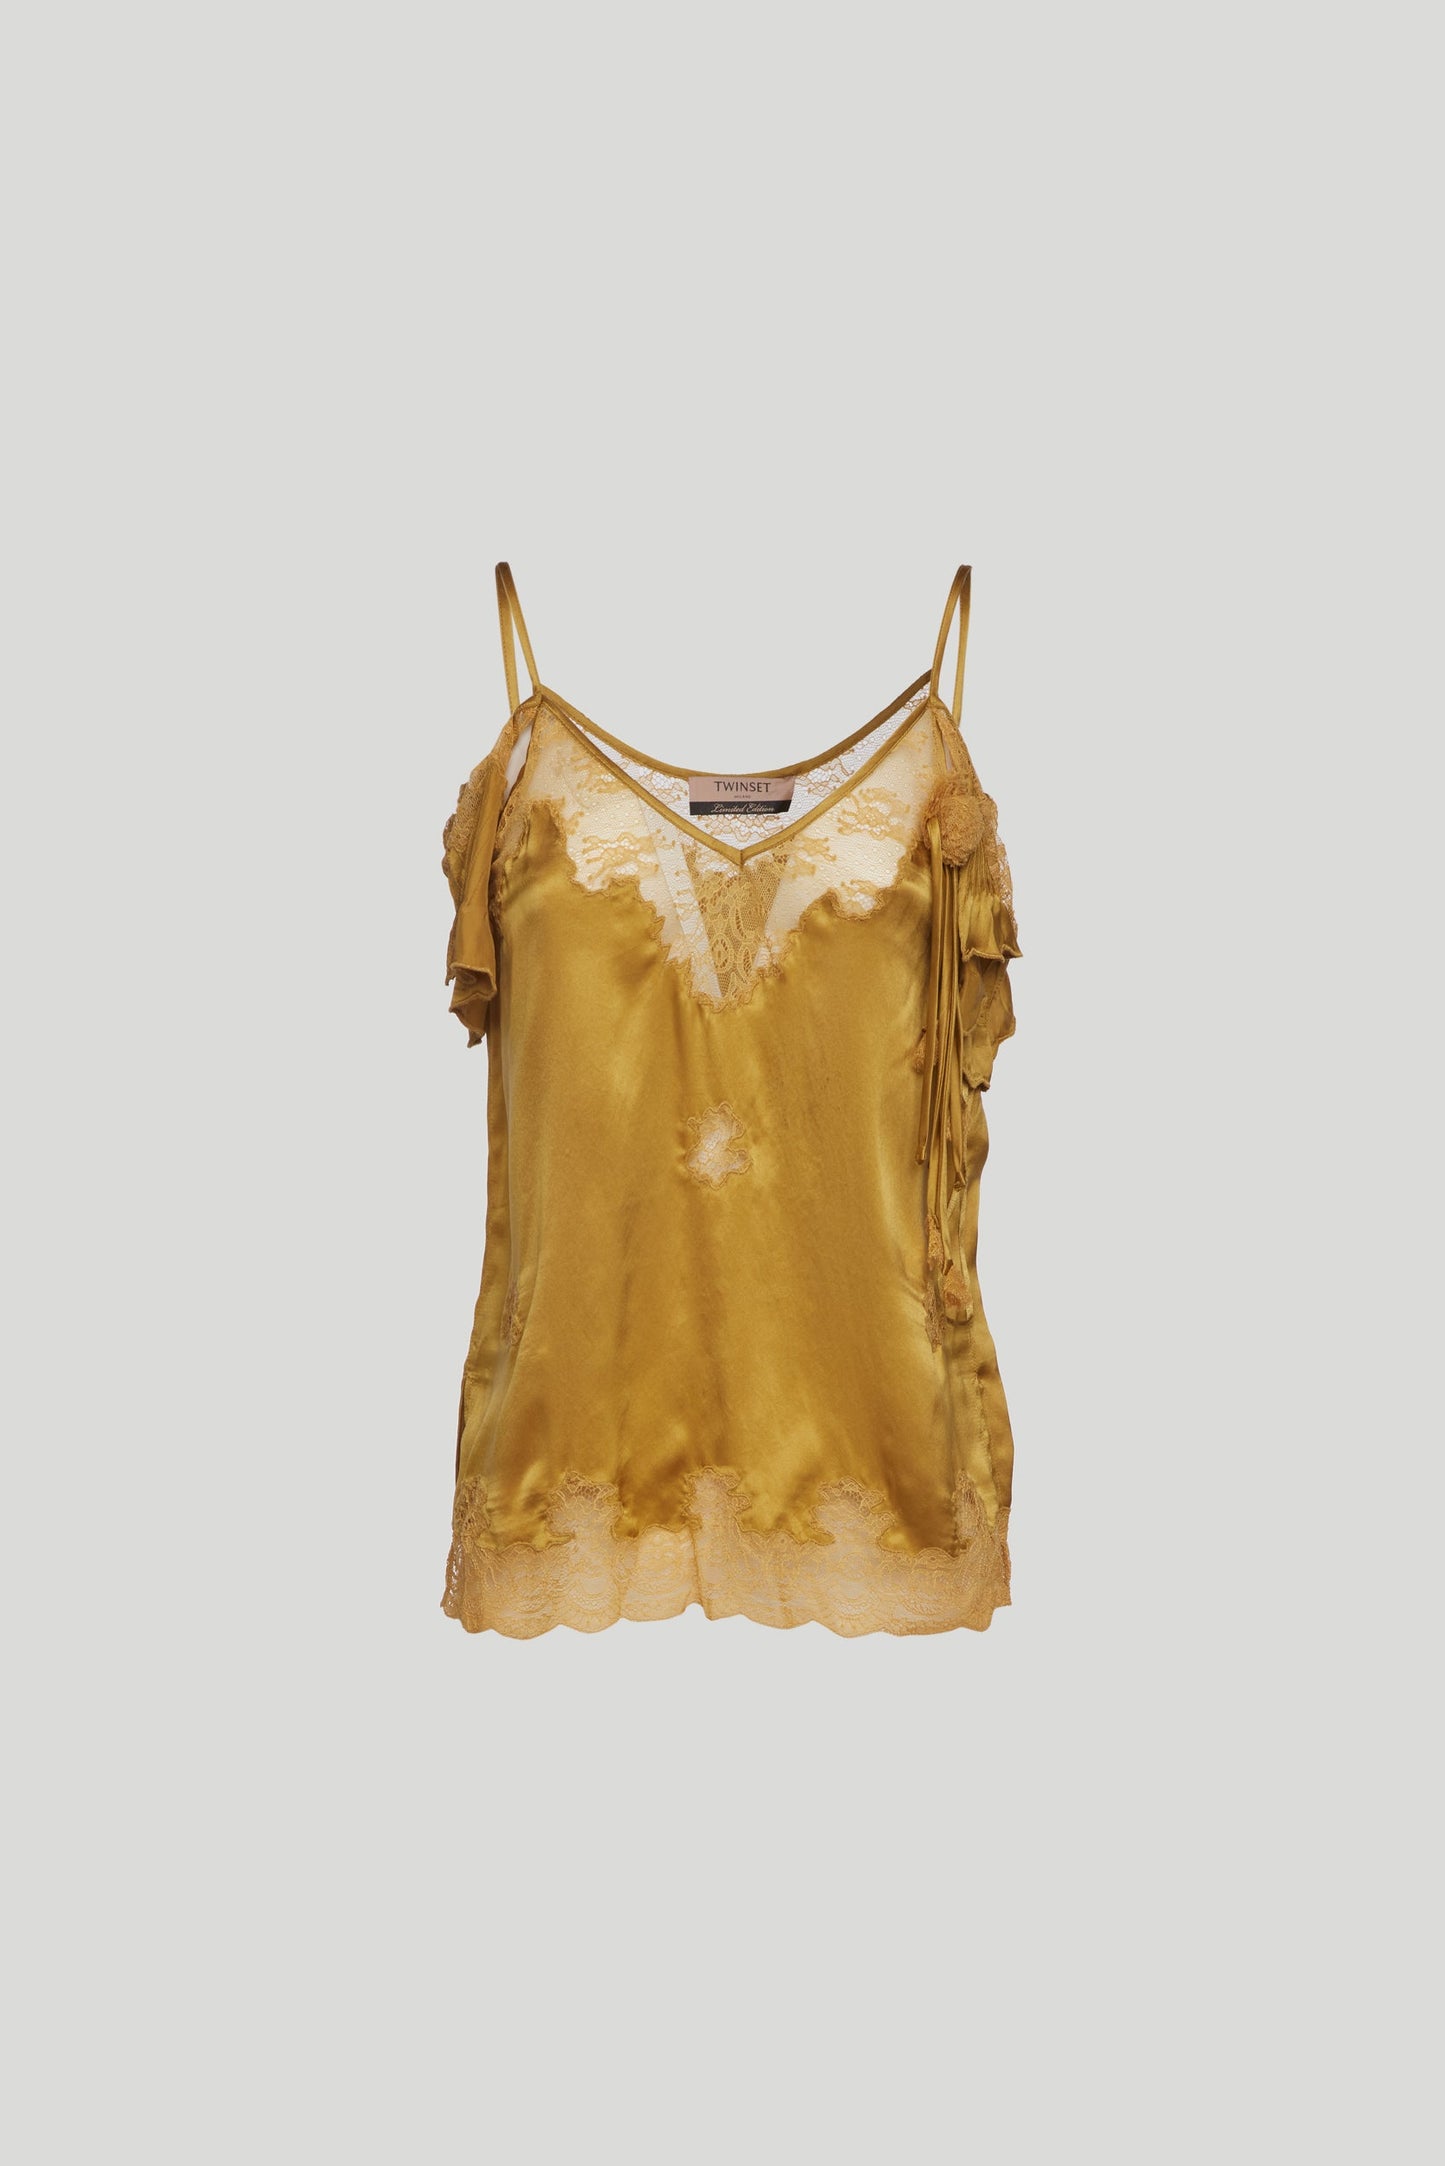 TWINSET Top Ocher Velvet and Lace